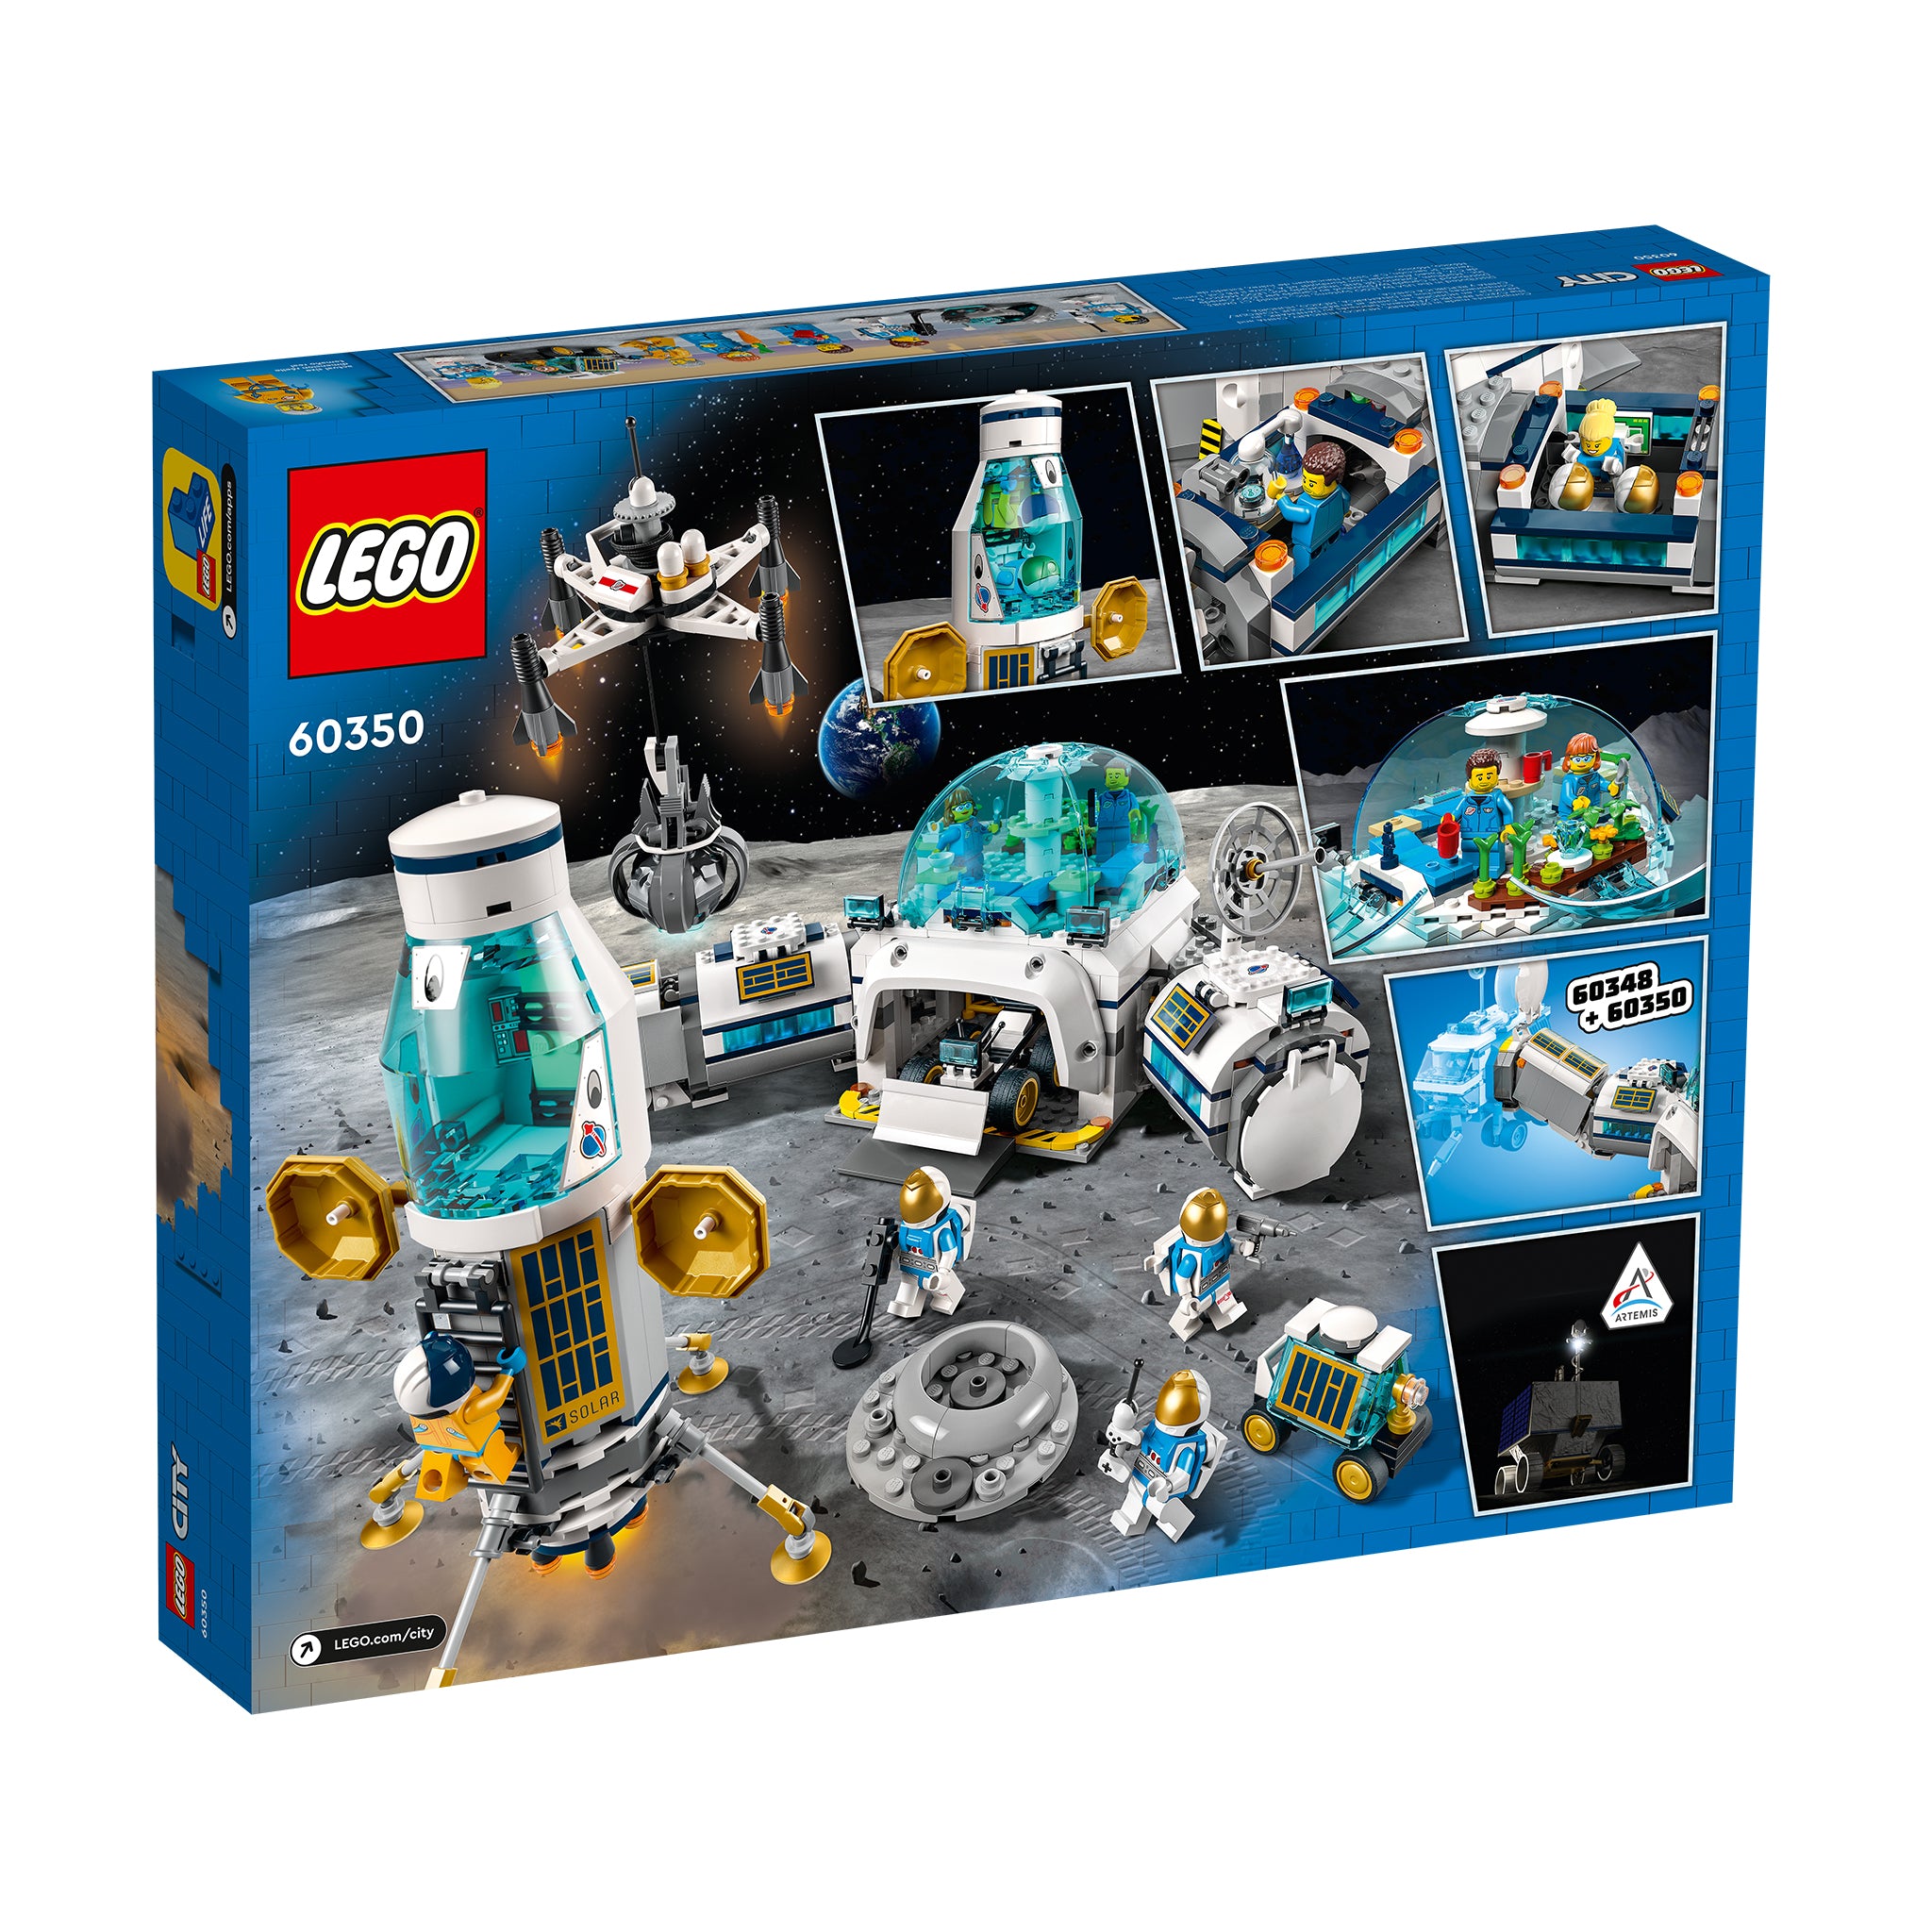 My account was disabled, Lego Copyright - Building Support